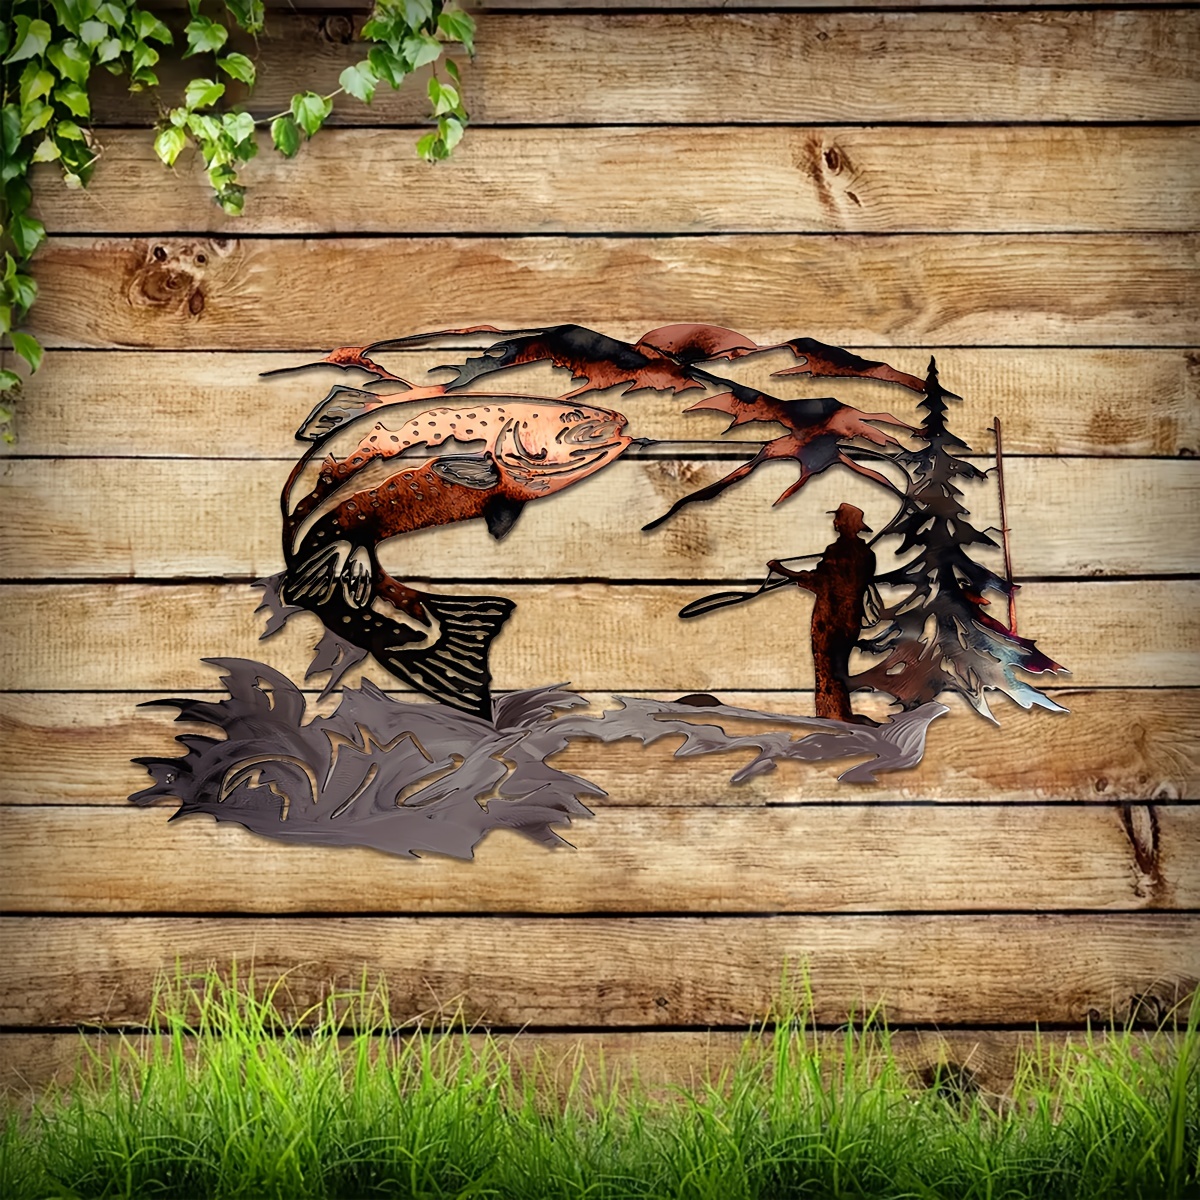 Fishing and Hunting Decor - Hunting Wall Art Decor - Gifts for